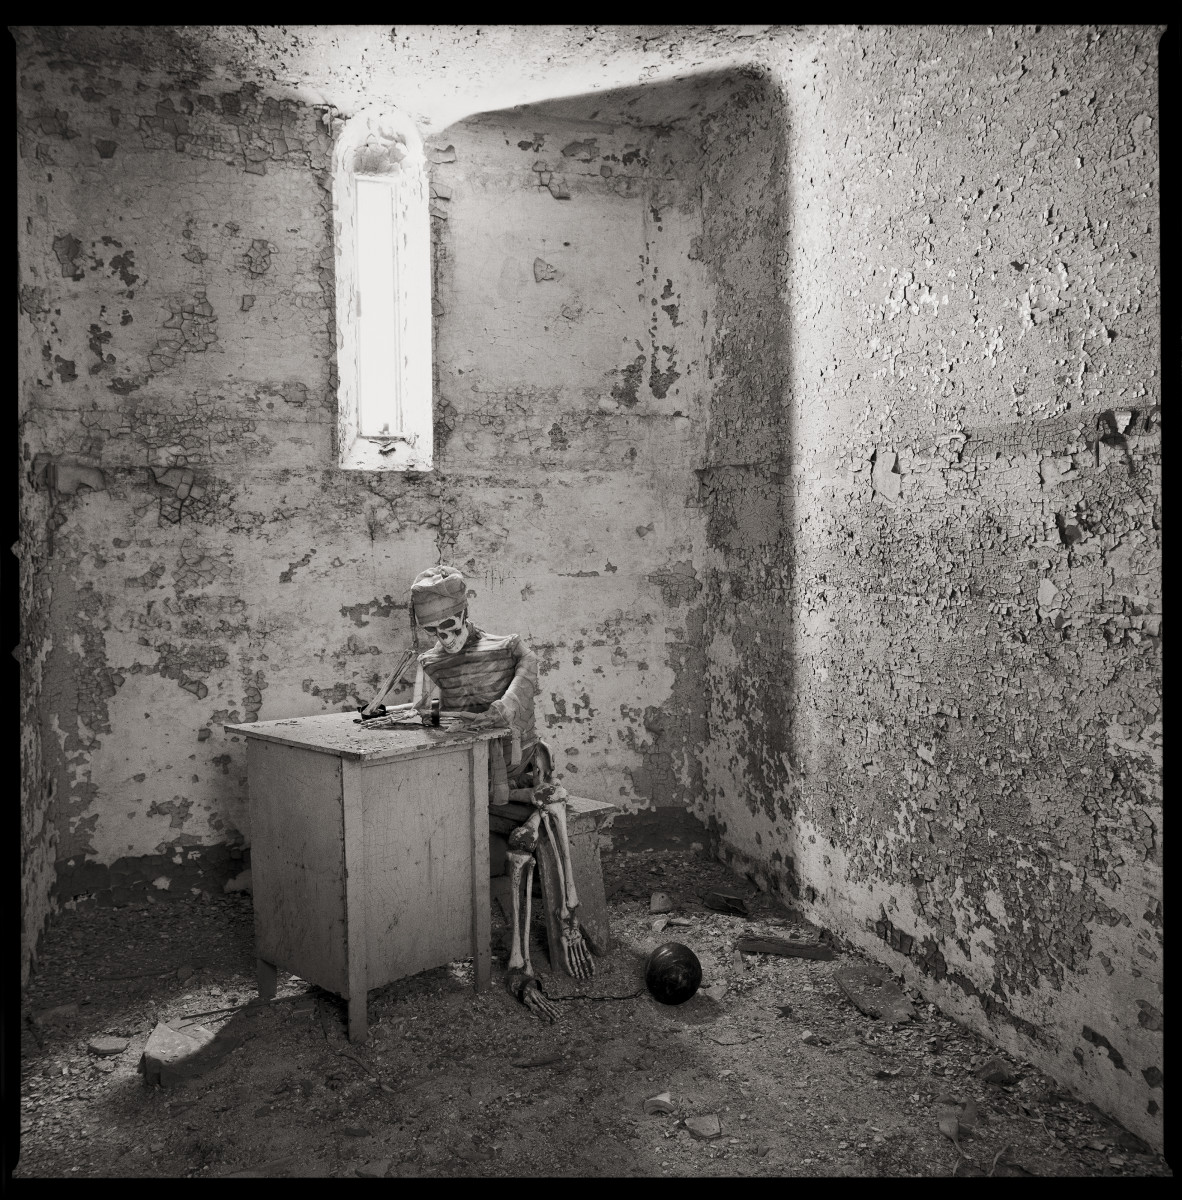 Self-Portrait by Eric T. Kunsman  Image: ID: A black and white image shows room with a window against the back wall and a desk bellow the window.  The paint is peeling and there is dirt and debris onto floor.  There is a skeleton sitting at the desk with prisoner clothing on.  